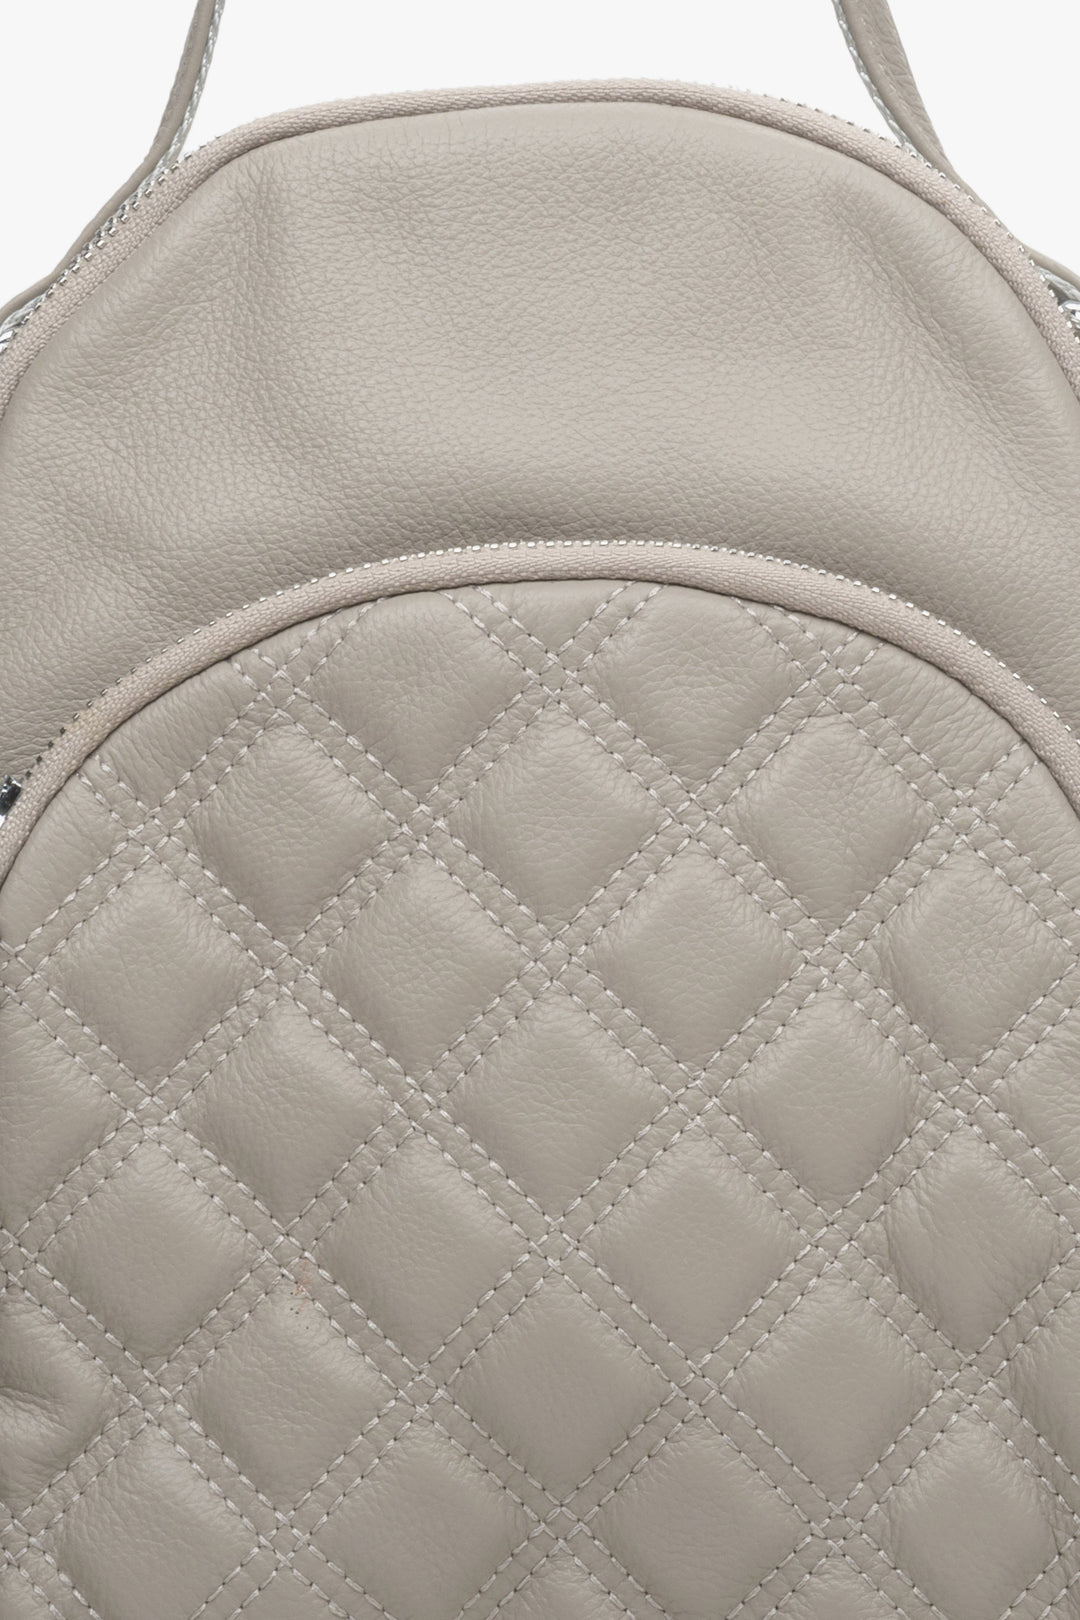 Genuine leather, small women's backpack by Estro in beige - close-up on the details.